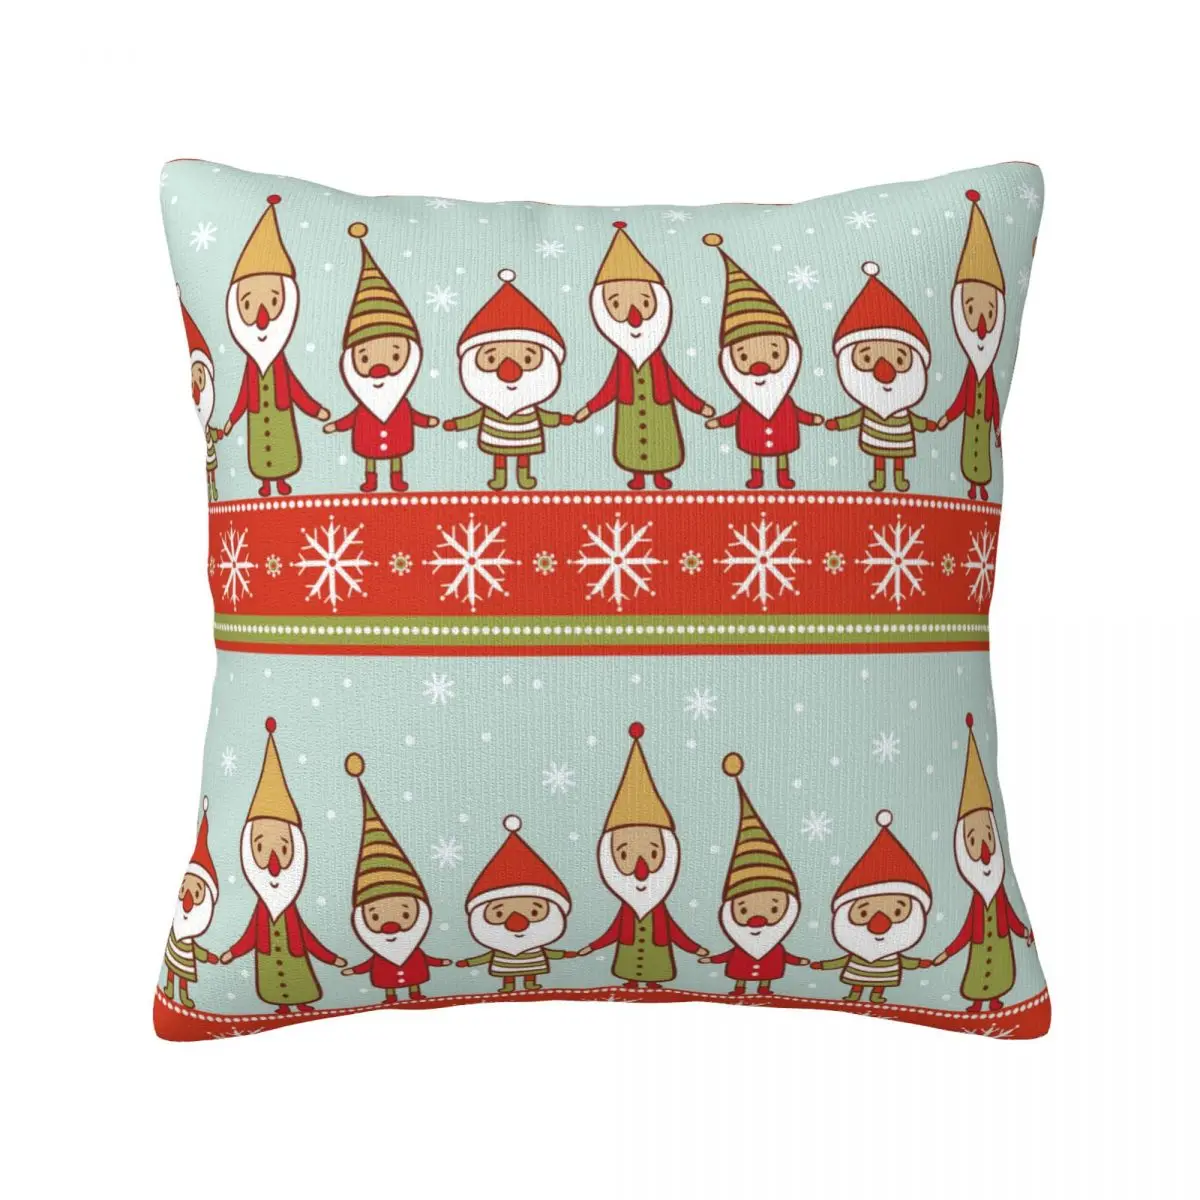 

Christmas Pattern With Gnomes Throw Pillow Cover Decorative Pillow Covers Home Pillows Shells Cushion Cover Zippered Pillowcase